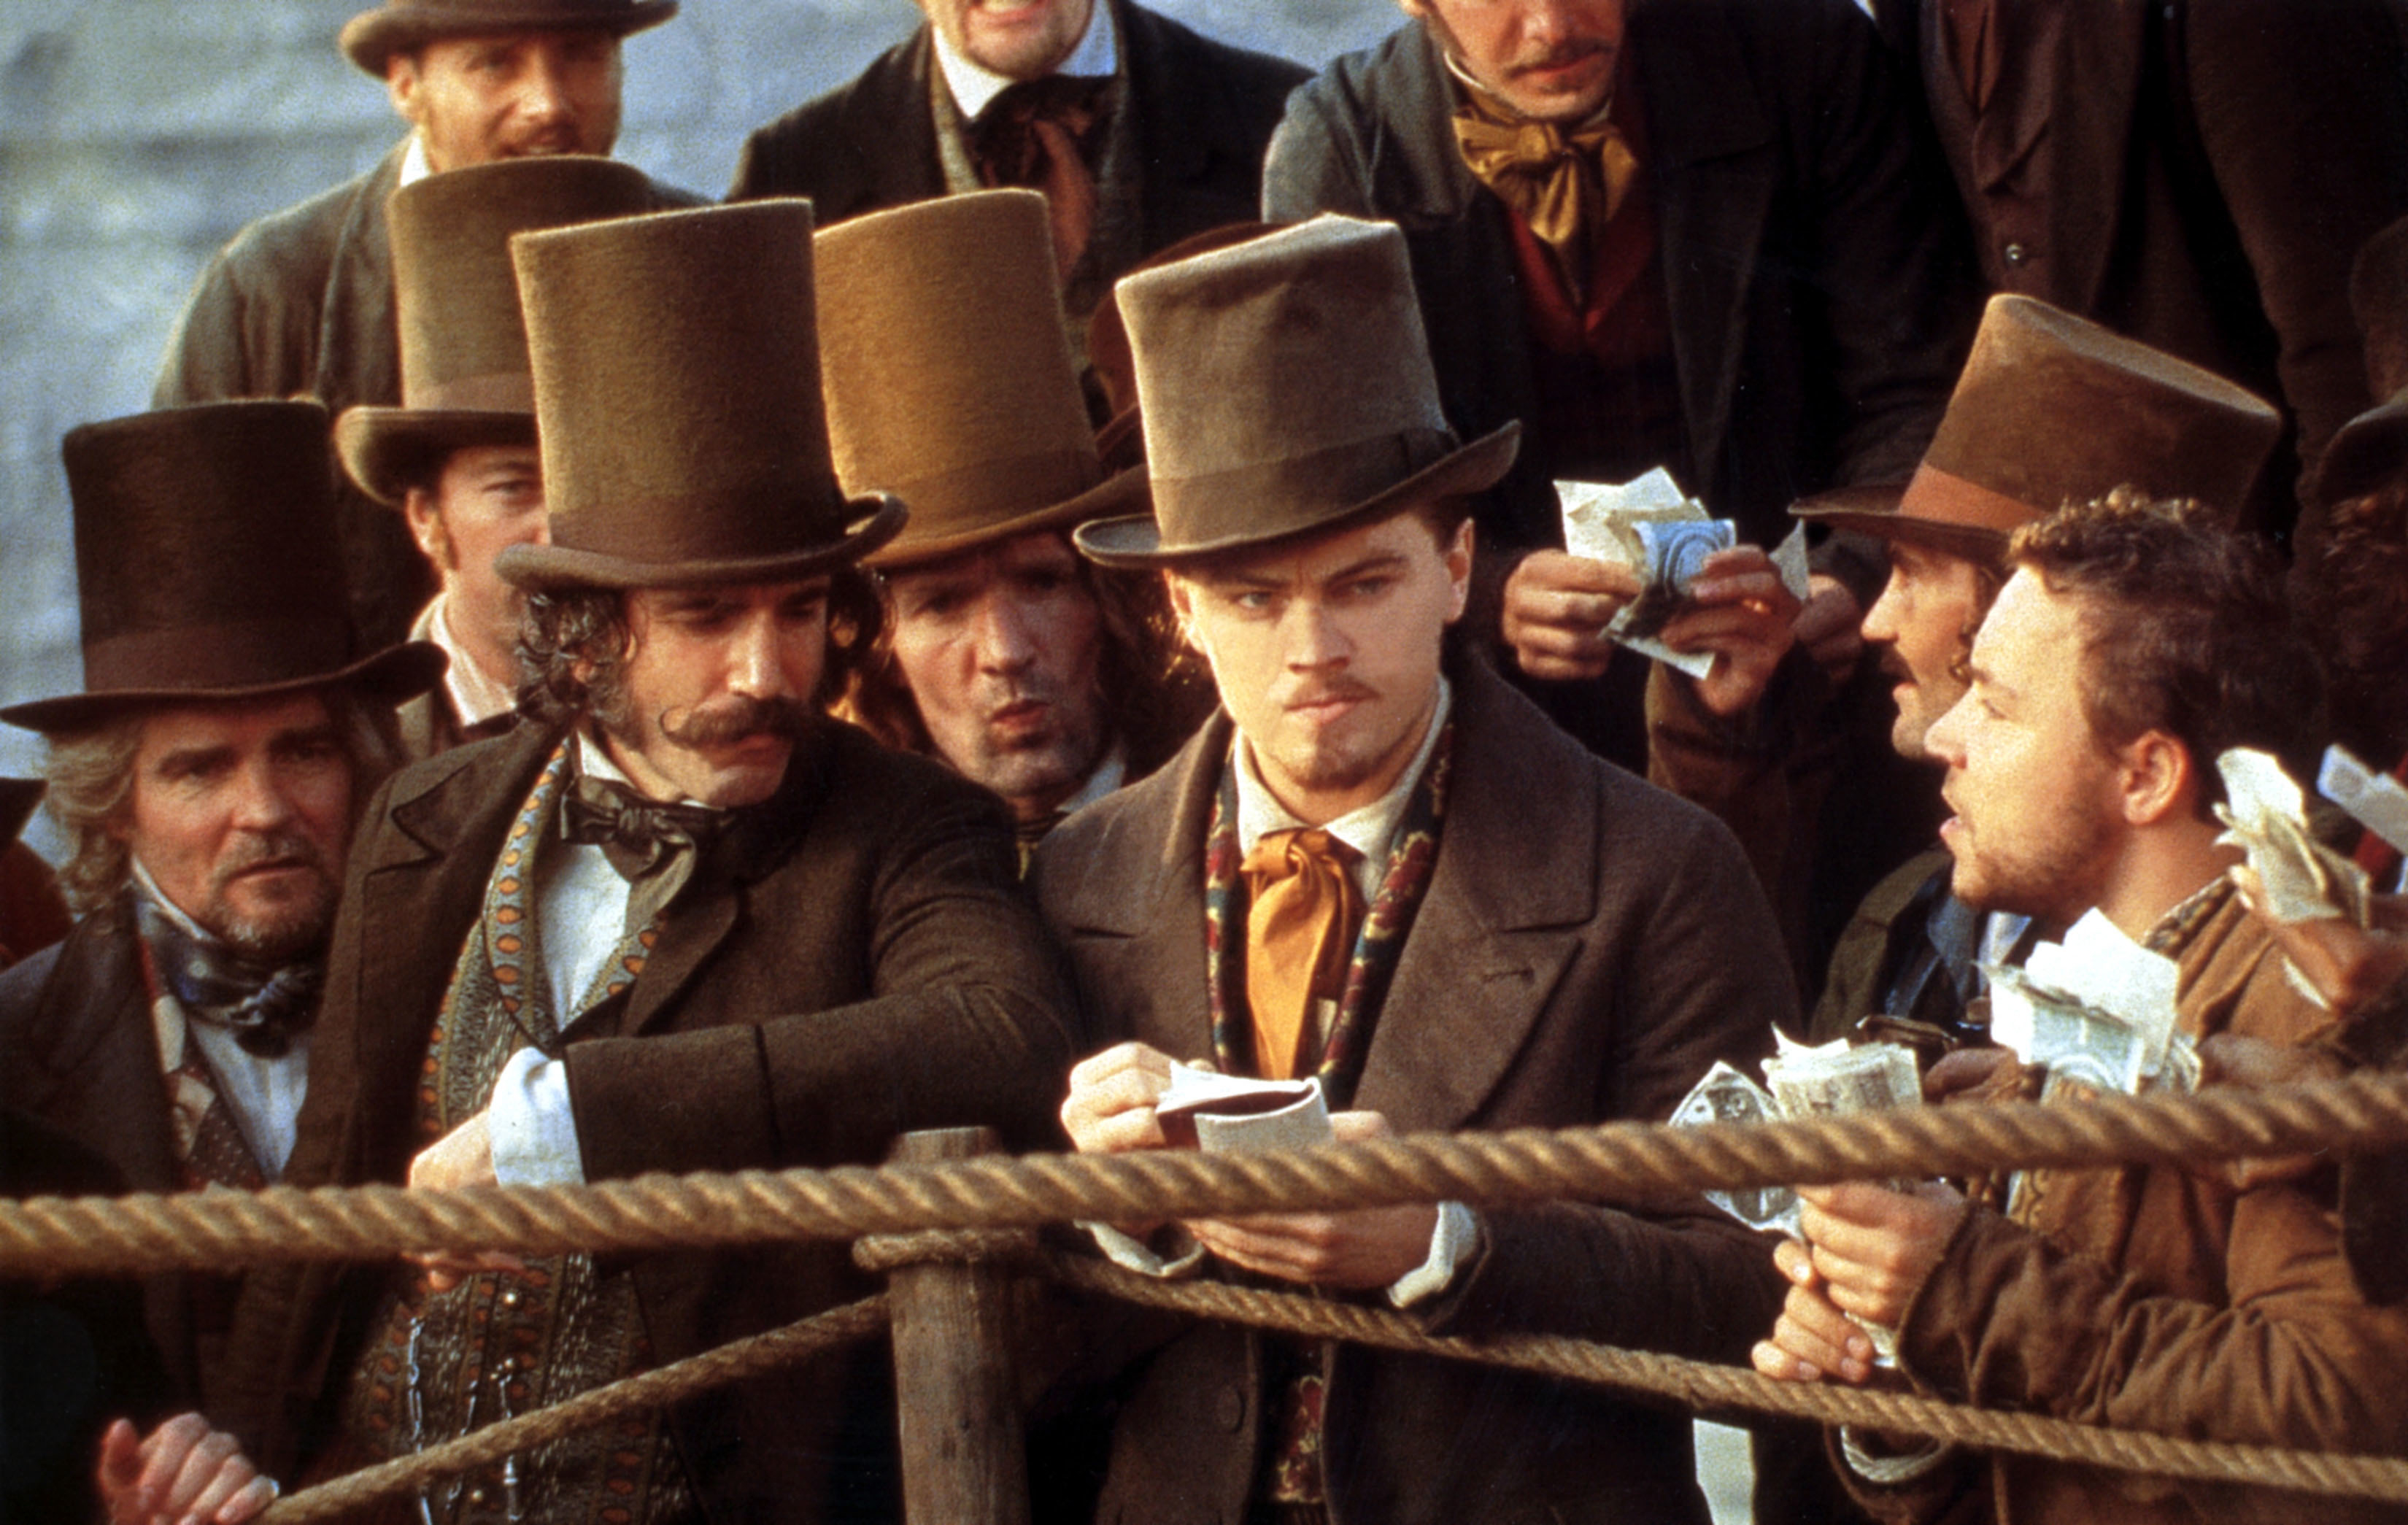 Daniel Day Lewis and Leonardo DiCaprio, donning top hats and brown jackets, stand near a rope barrier